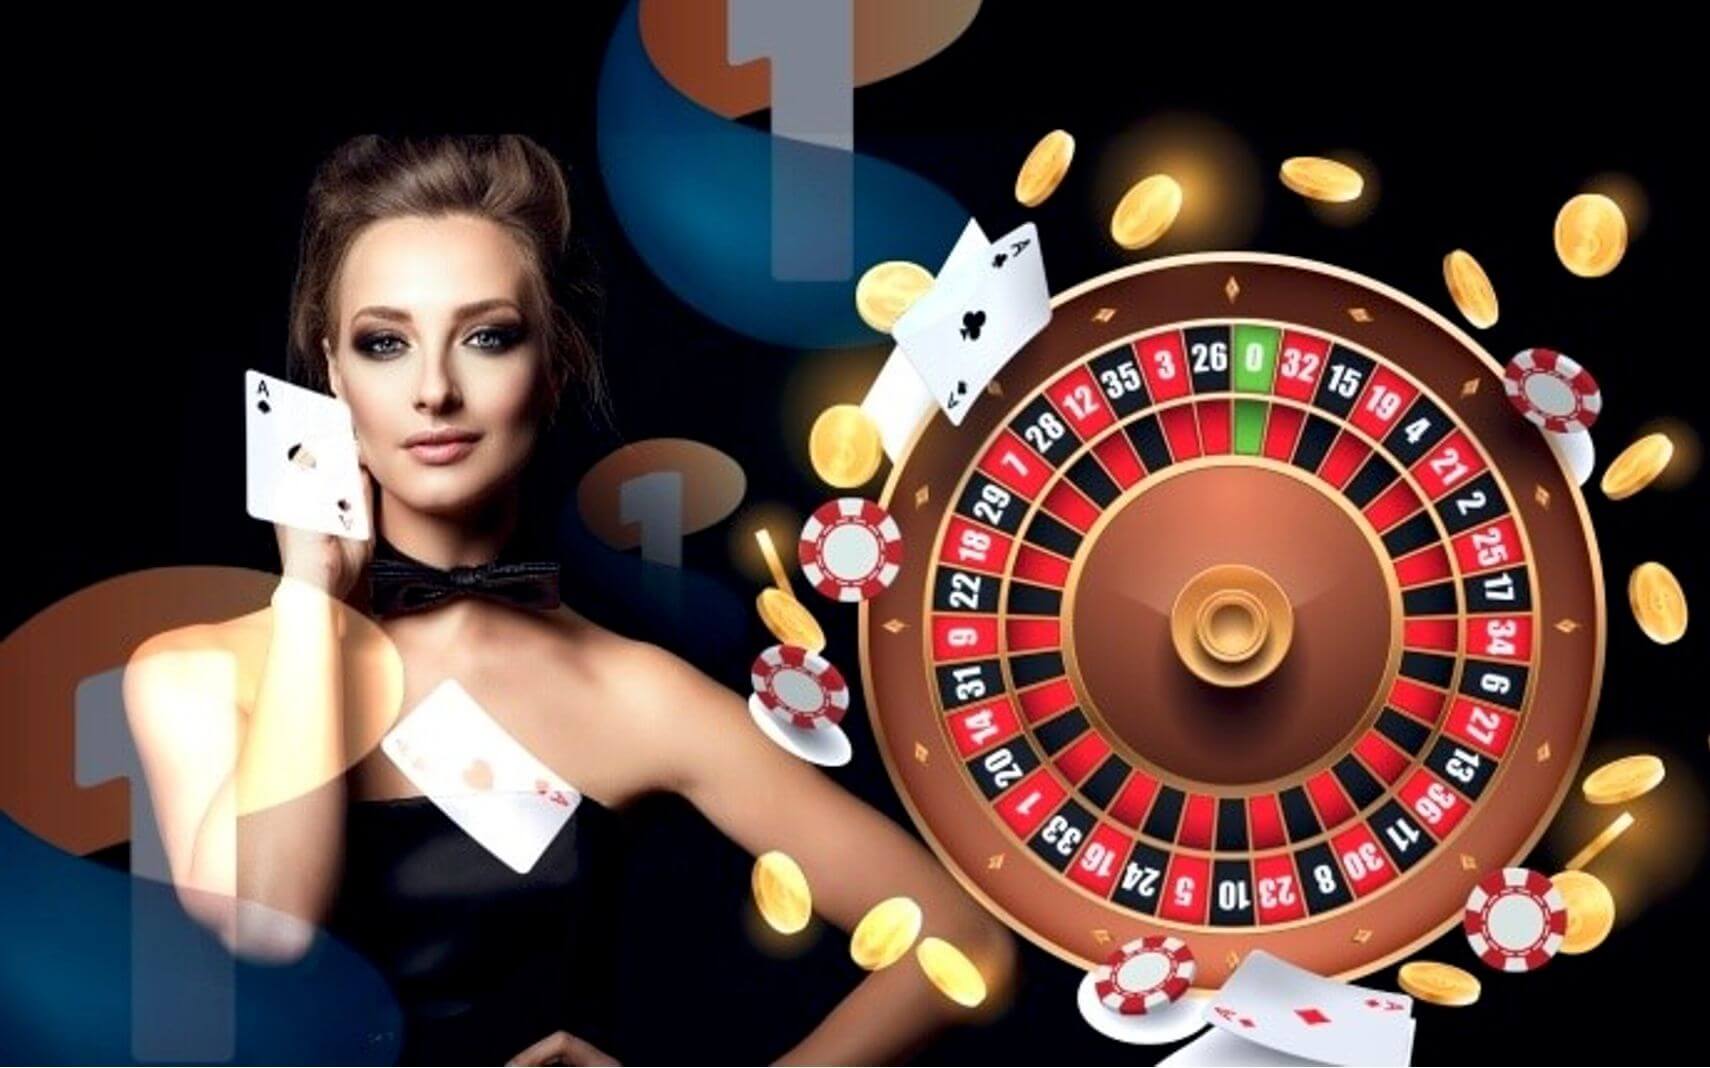 Advantages of Live Casino Games - The World Financial Review